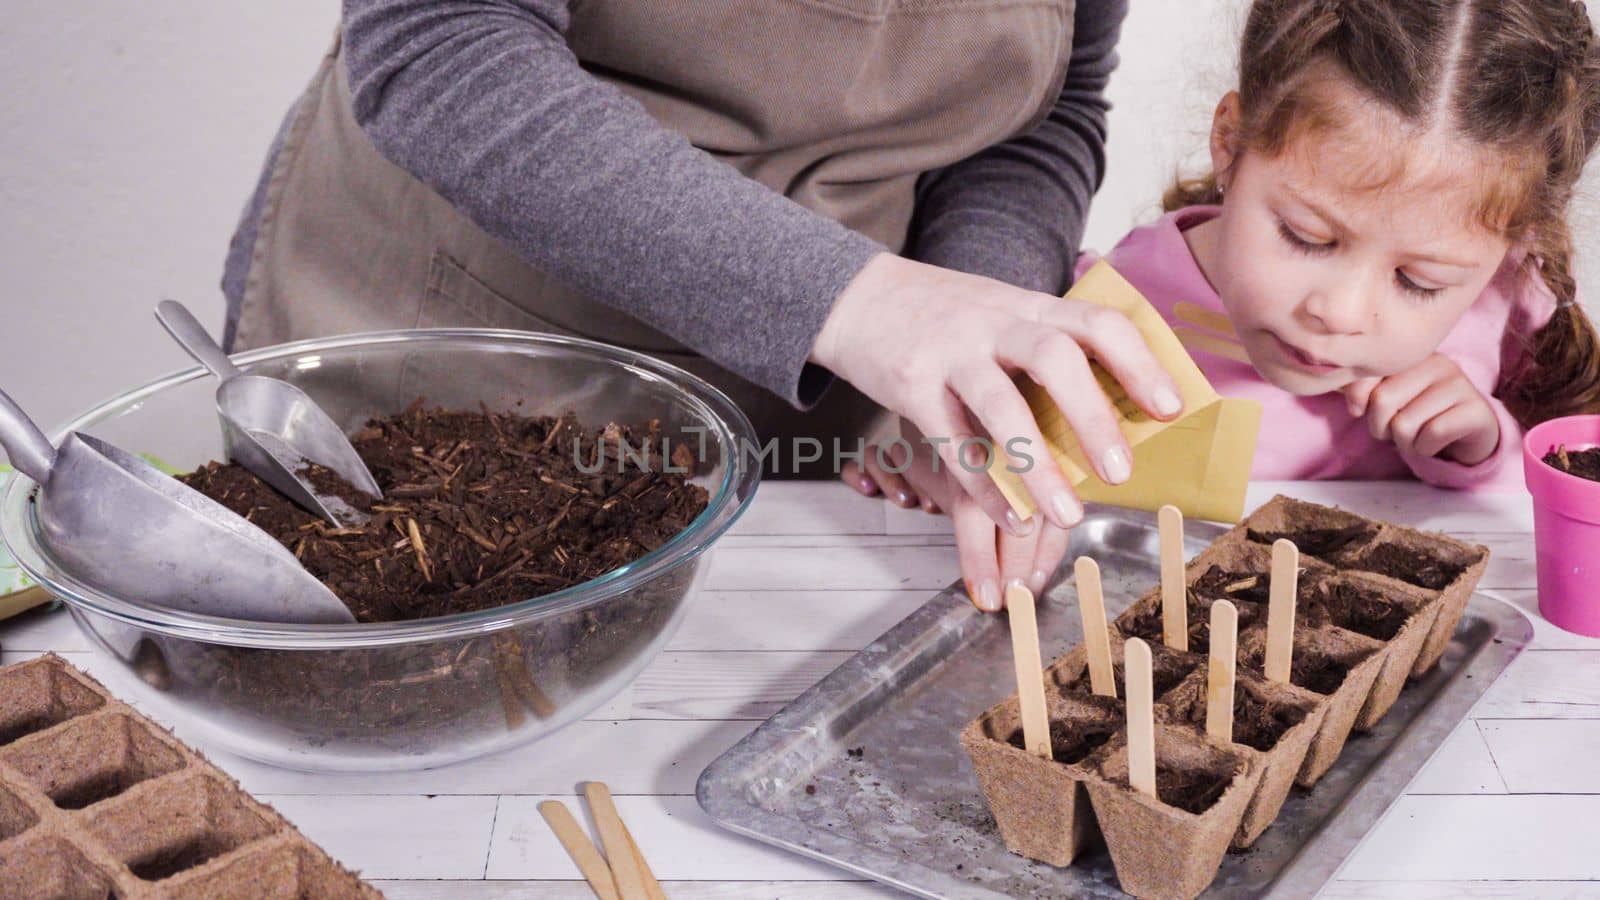 Little girl helping to plant herb seeds into small containers for a homeschool project.